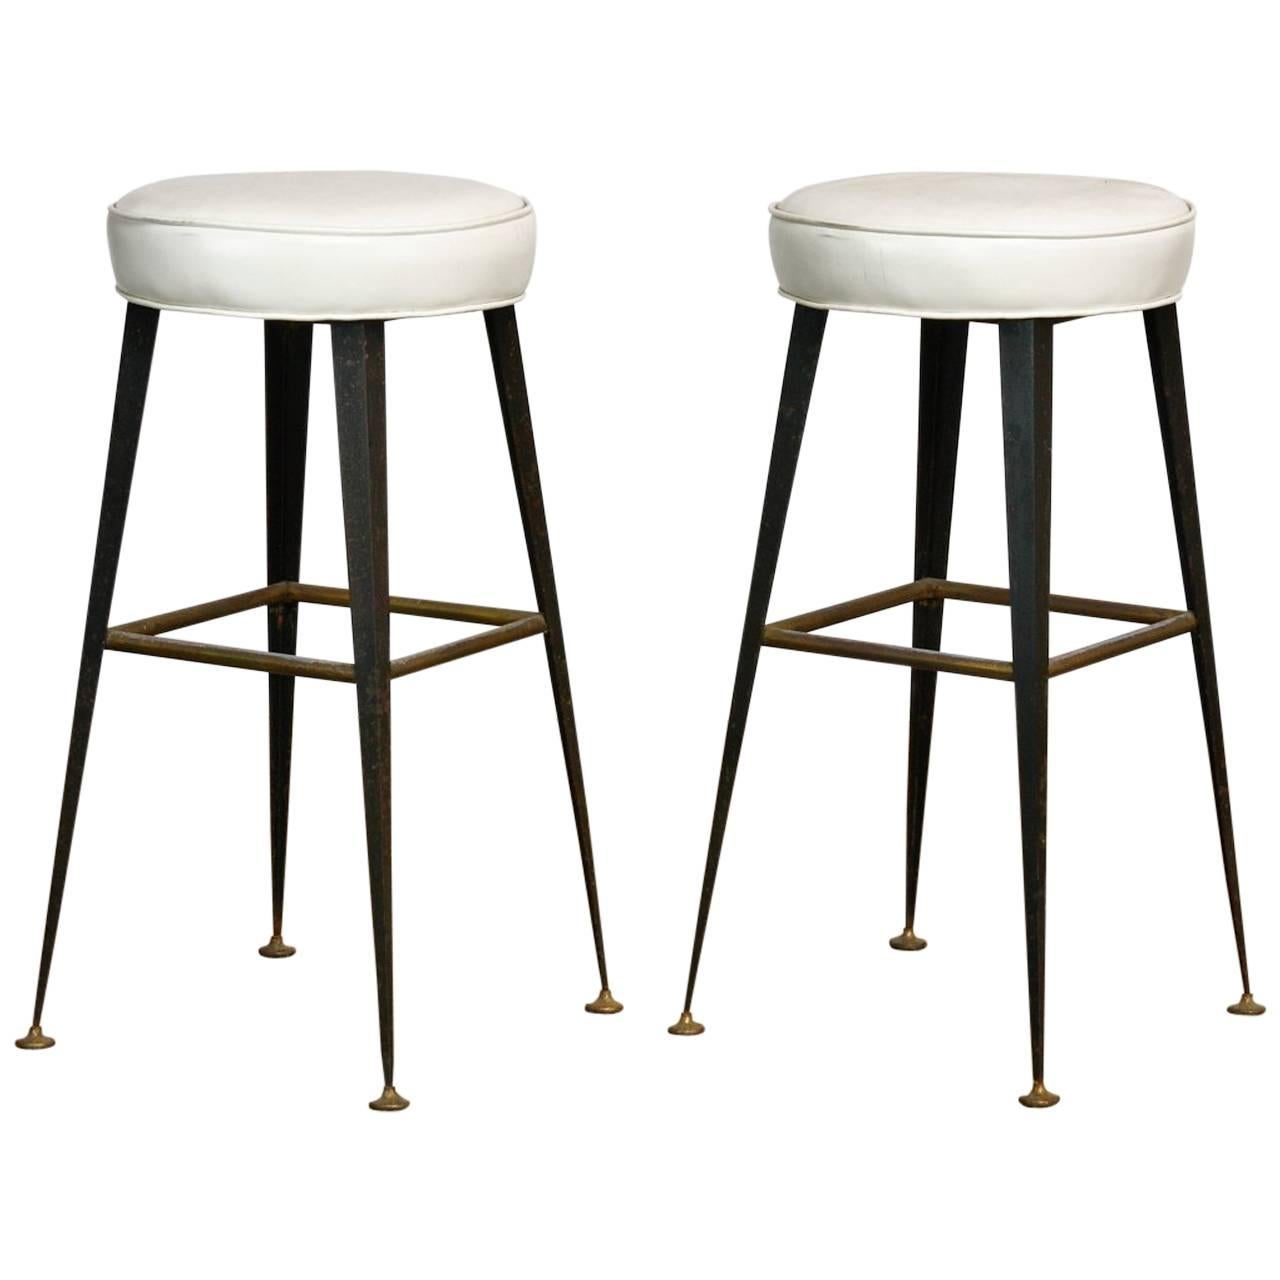 Pair of Midcentury Industrial Iron and Vinyl Barstools